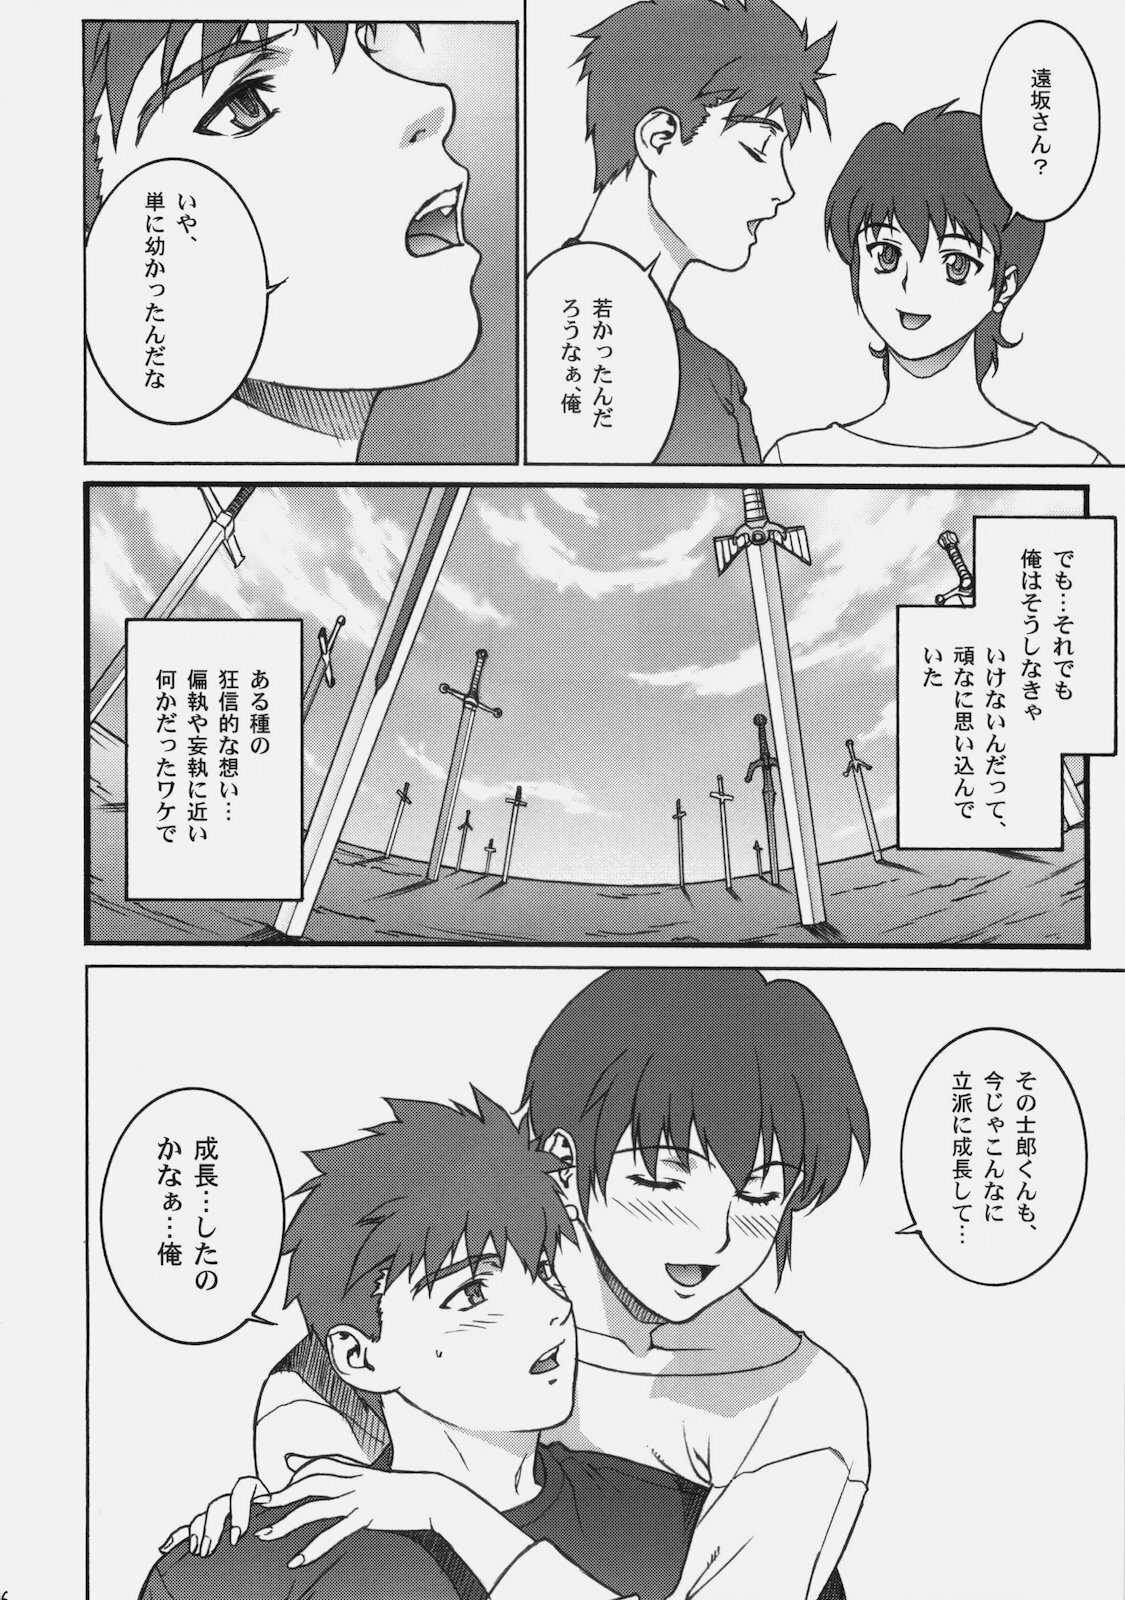 [Motchie Kingdom (Motchie)] Theater of Fate (Fate/stay night) page 15 full